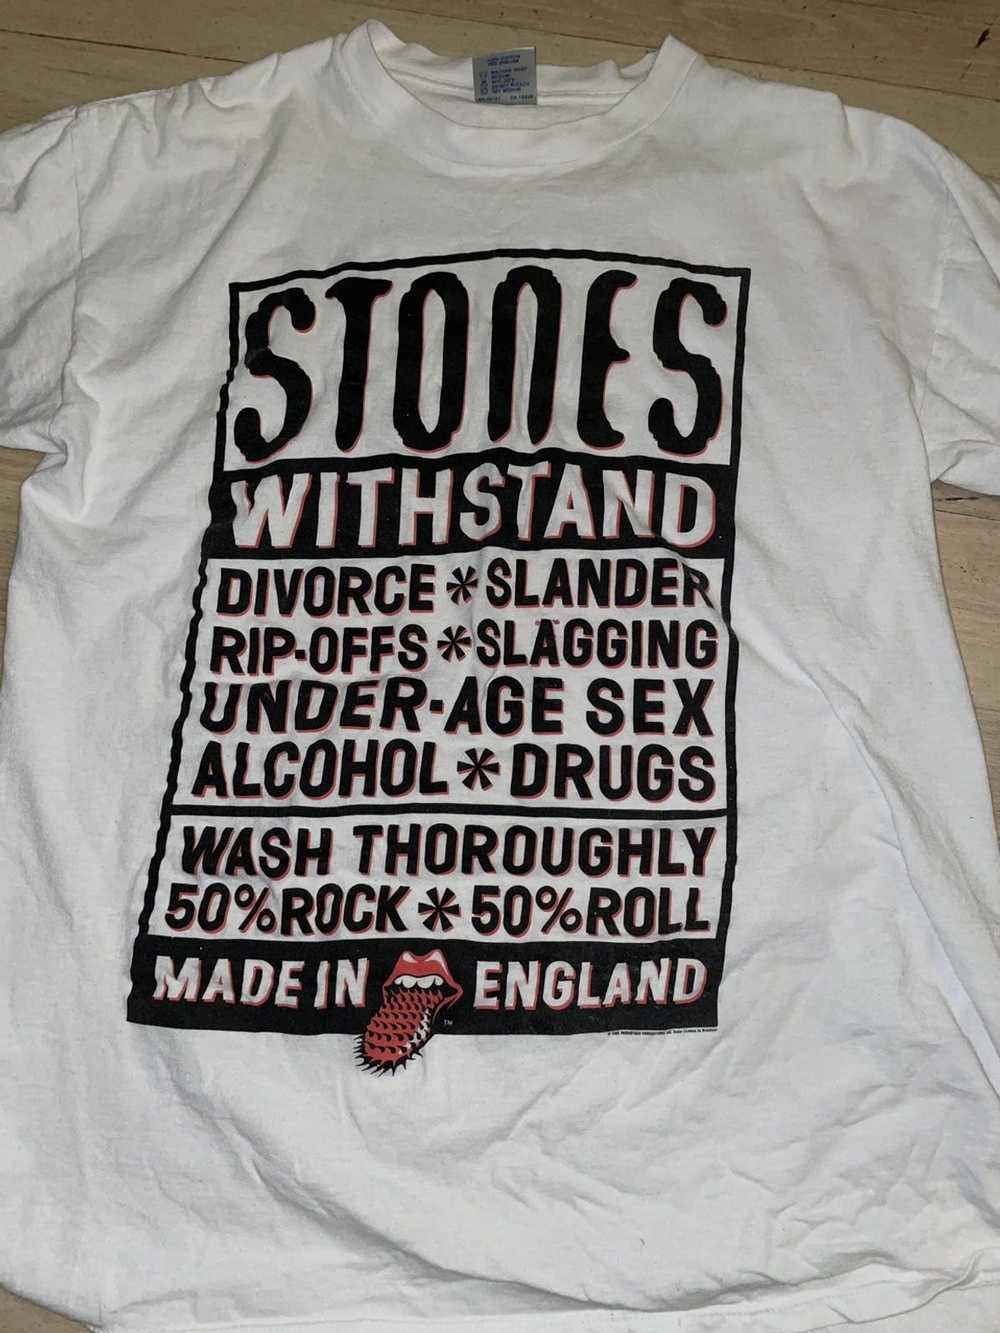 The Rolling Stones Rolling Stones vintage T shirt - image 1